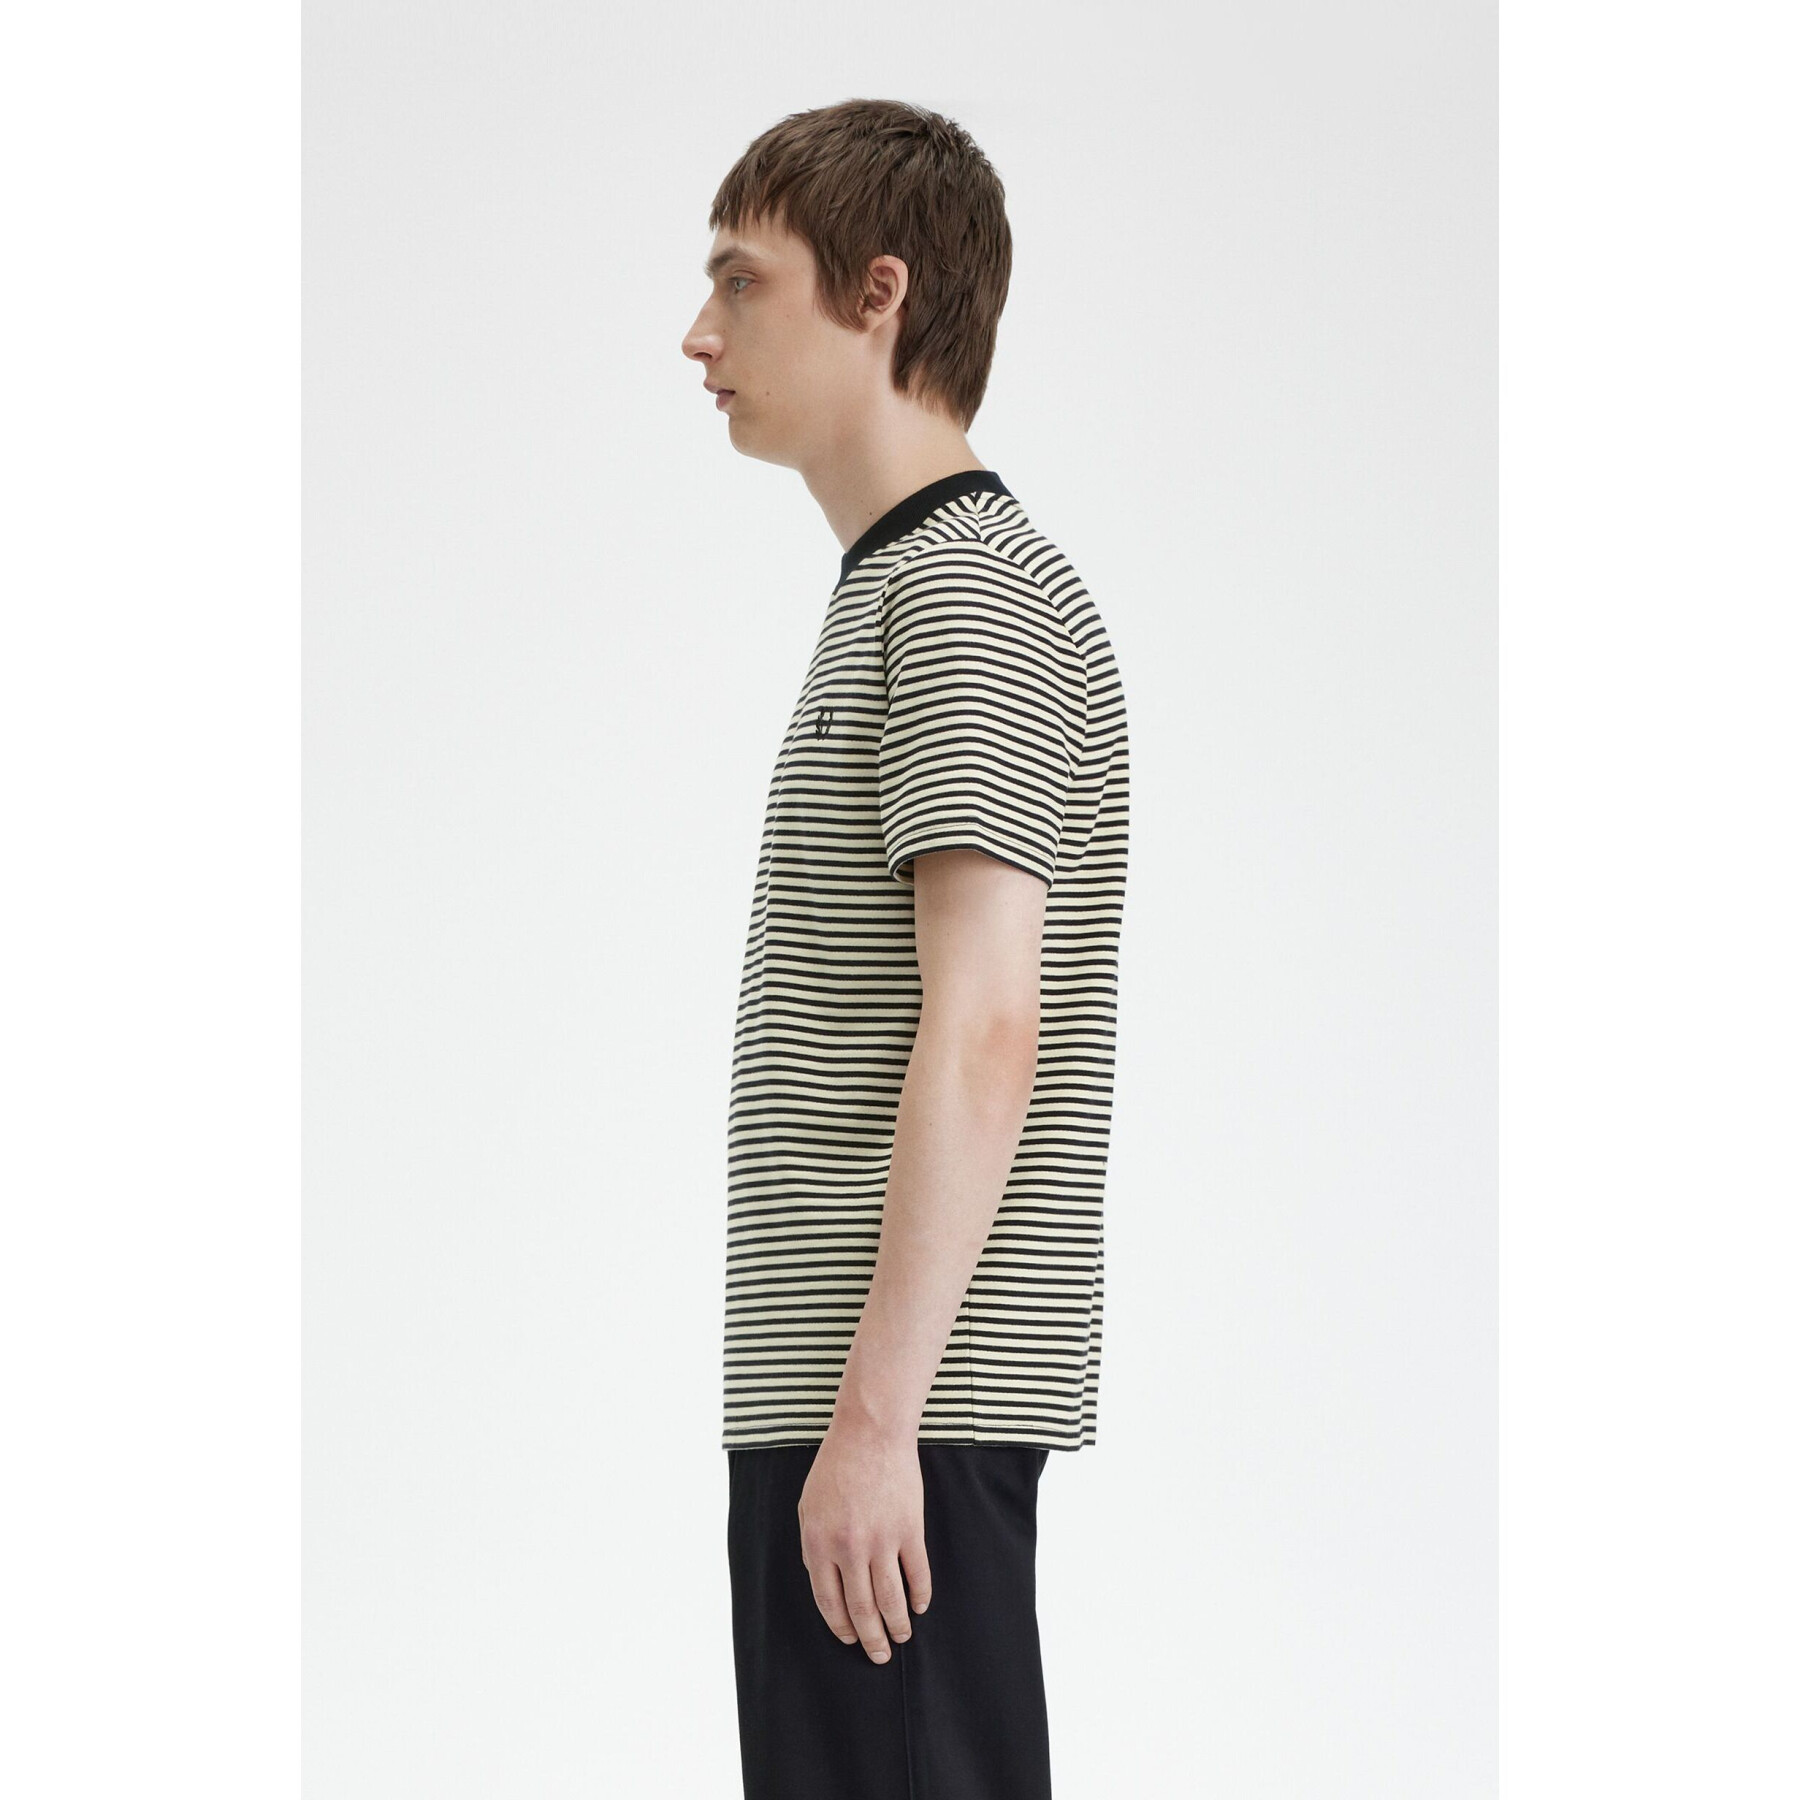 T-shirt Fred Perry Fine Stripe Heavy Weight